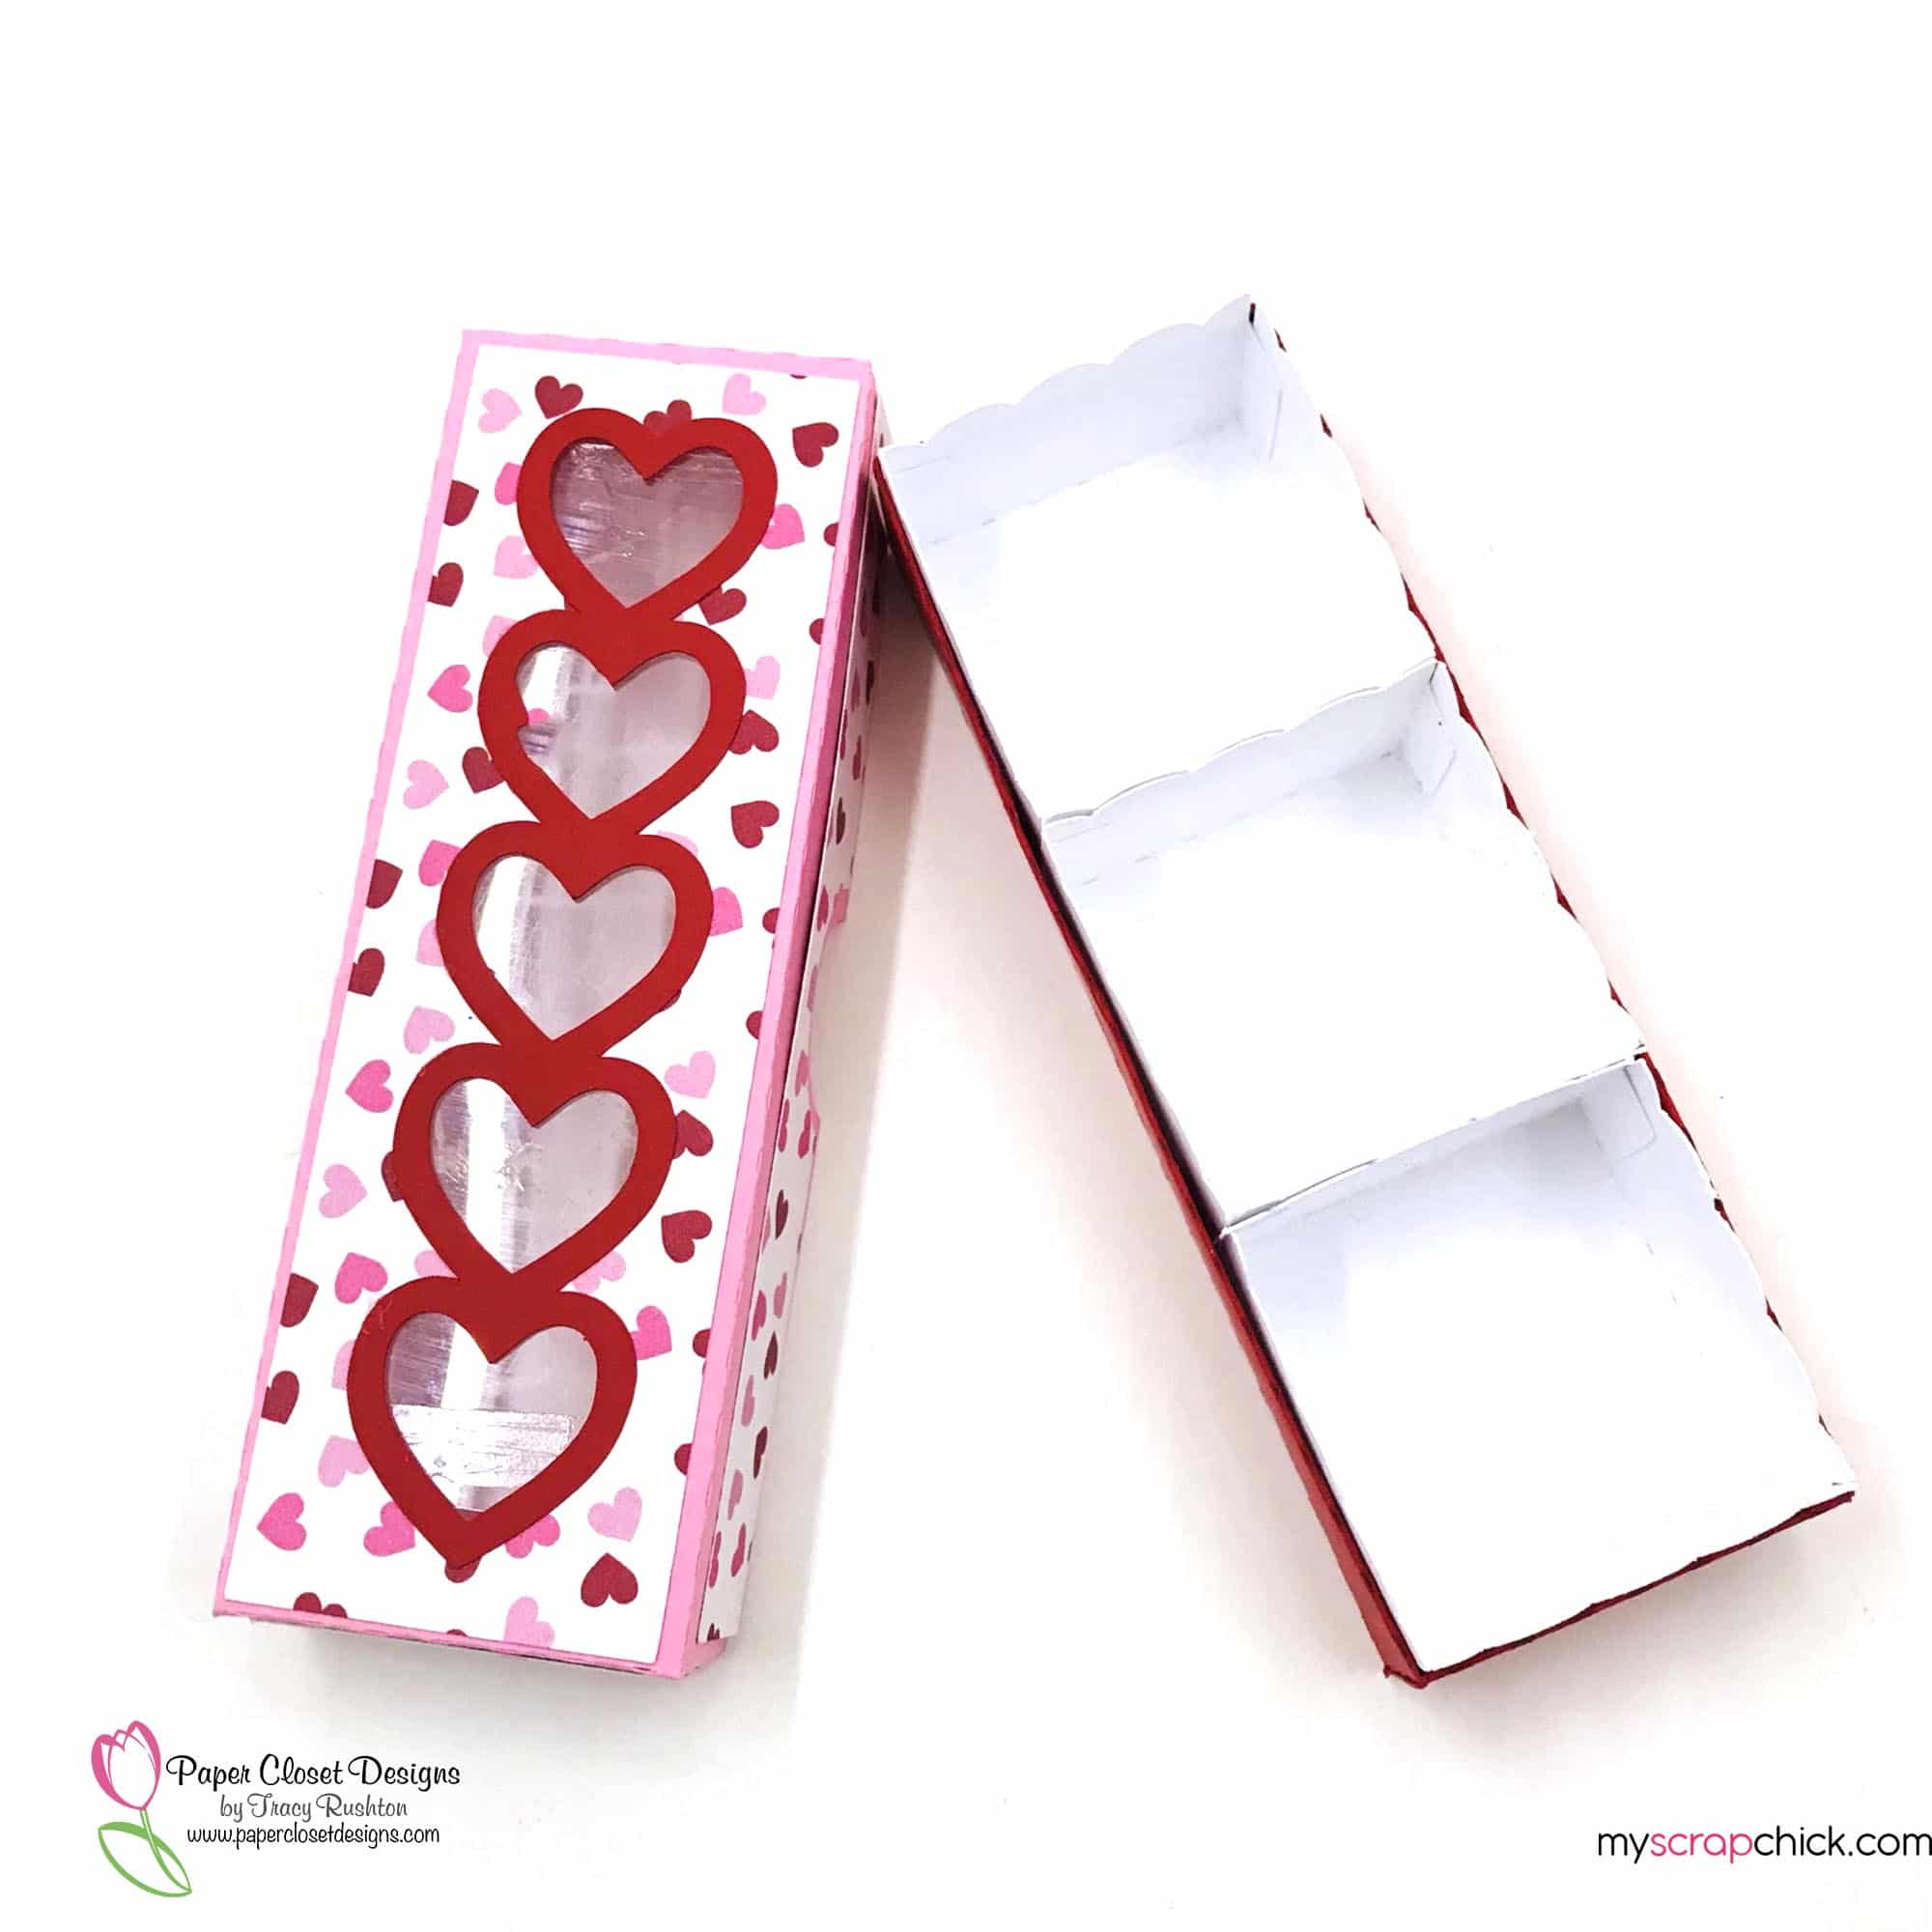 1x3 Heart Candy Box with liners